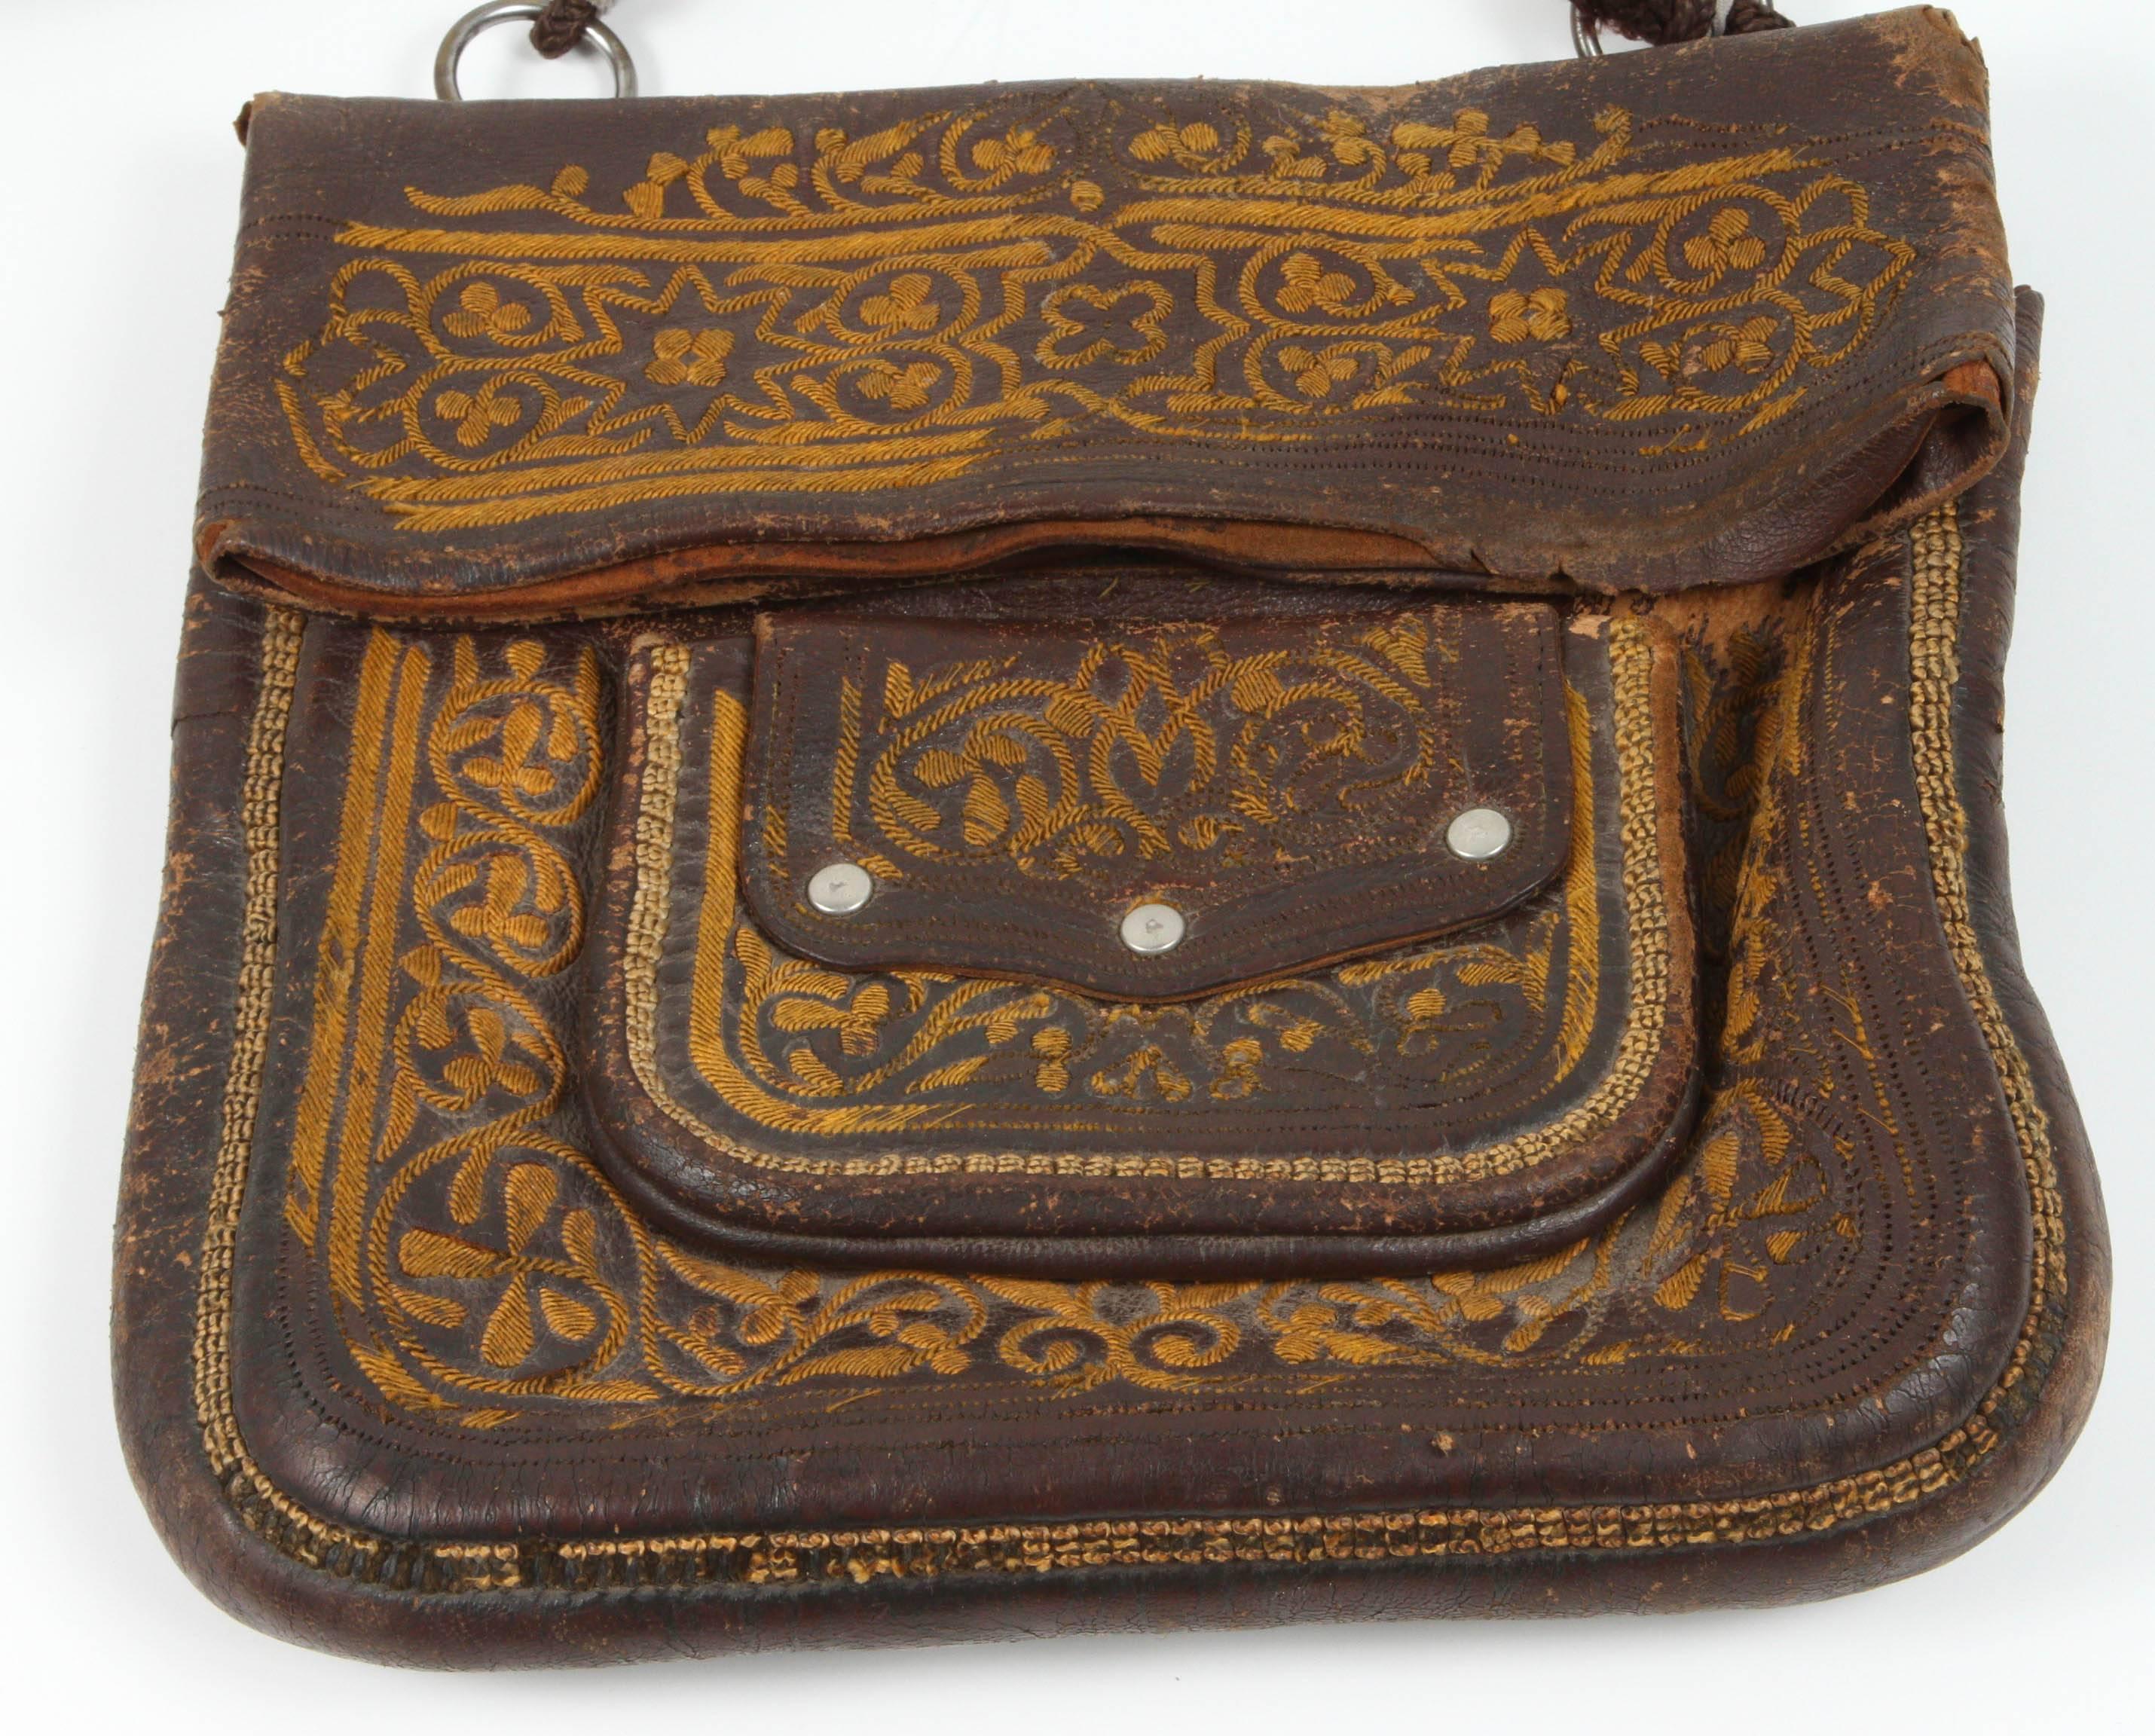 Hand-crafted in Morocco, this messenger leather African bag is hand-embroidered.
This is an old antique man shoulder slim bag, merchants in Morocco when travelling used this bag under their coat to put their money and valuables.
